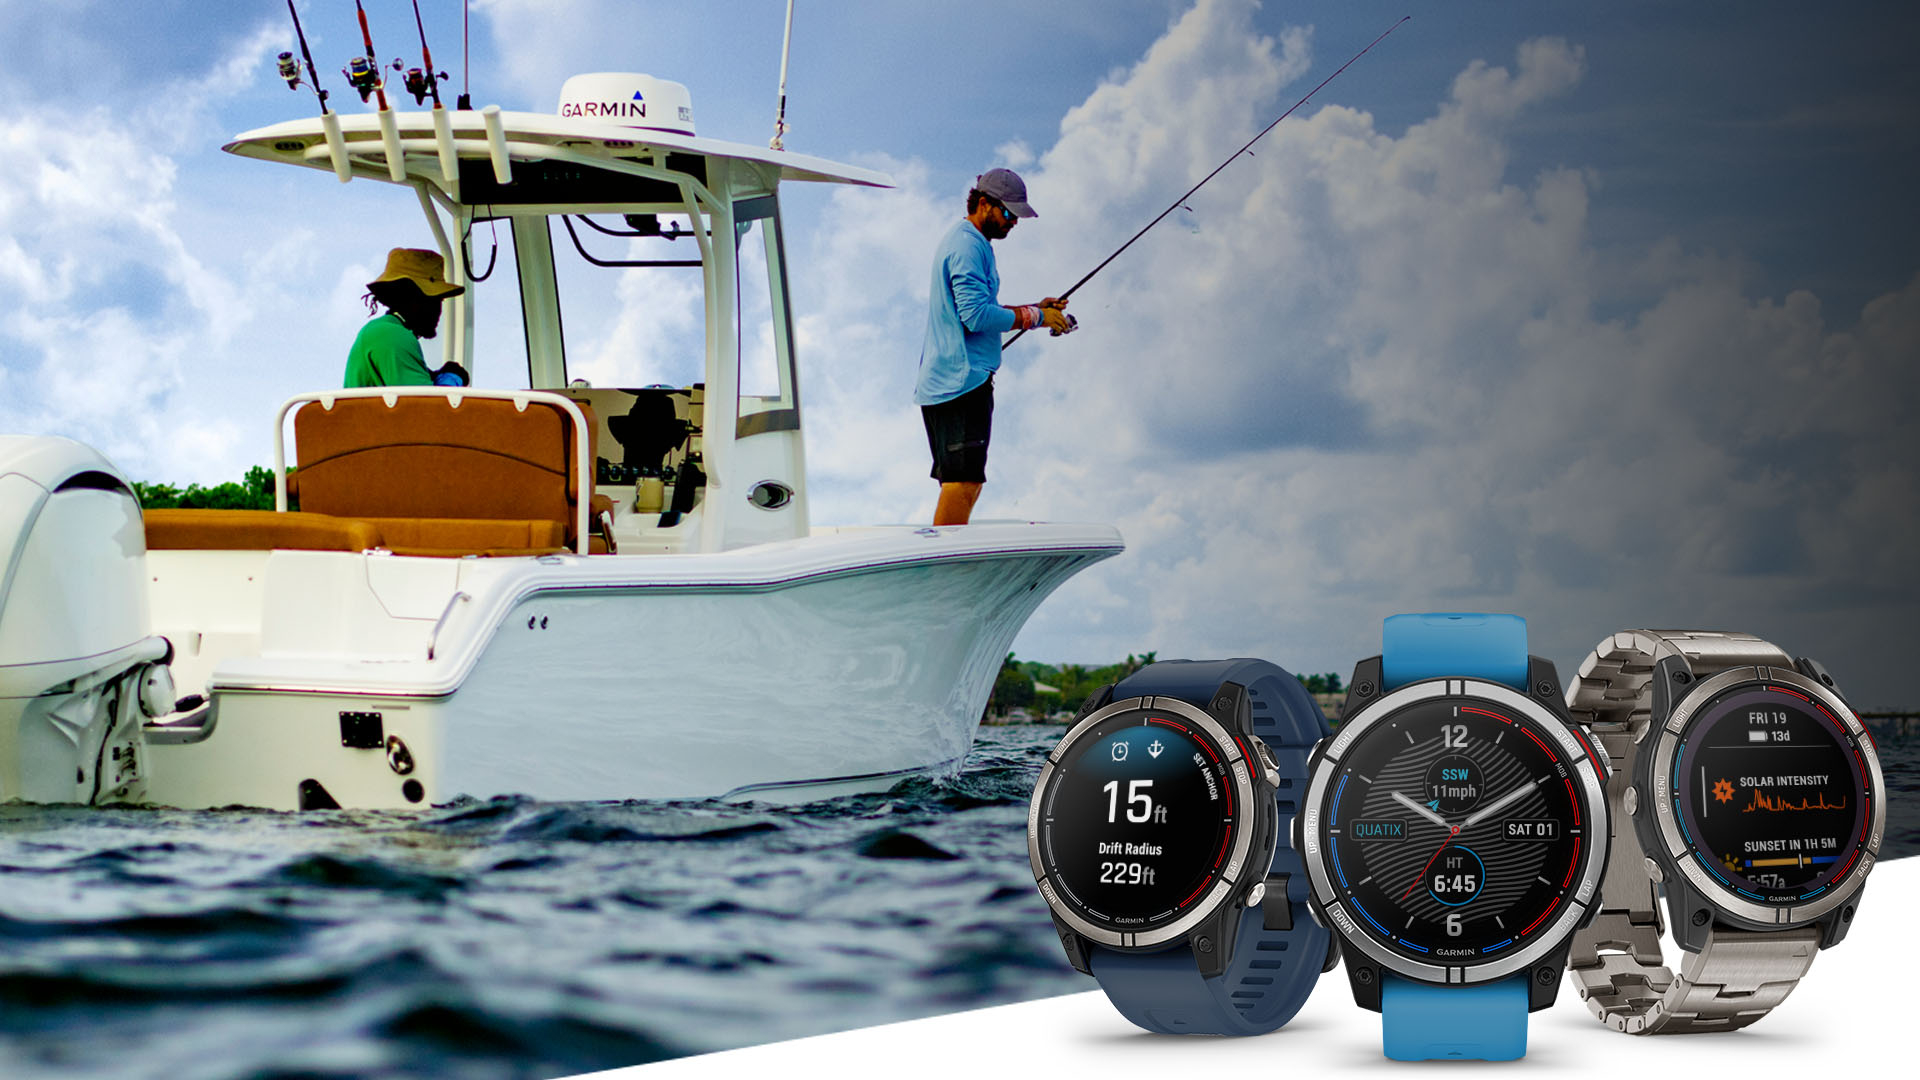 Garmin 7 smartwatch active boater lifestyle | Business Wire